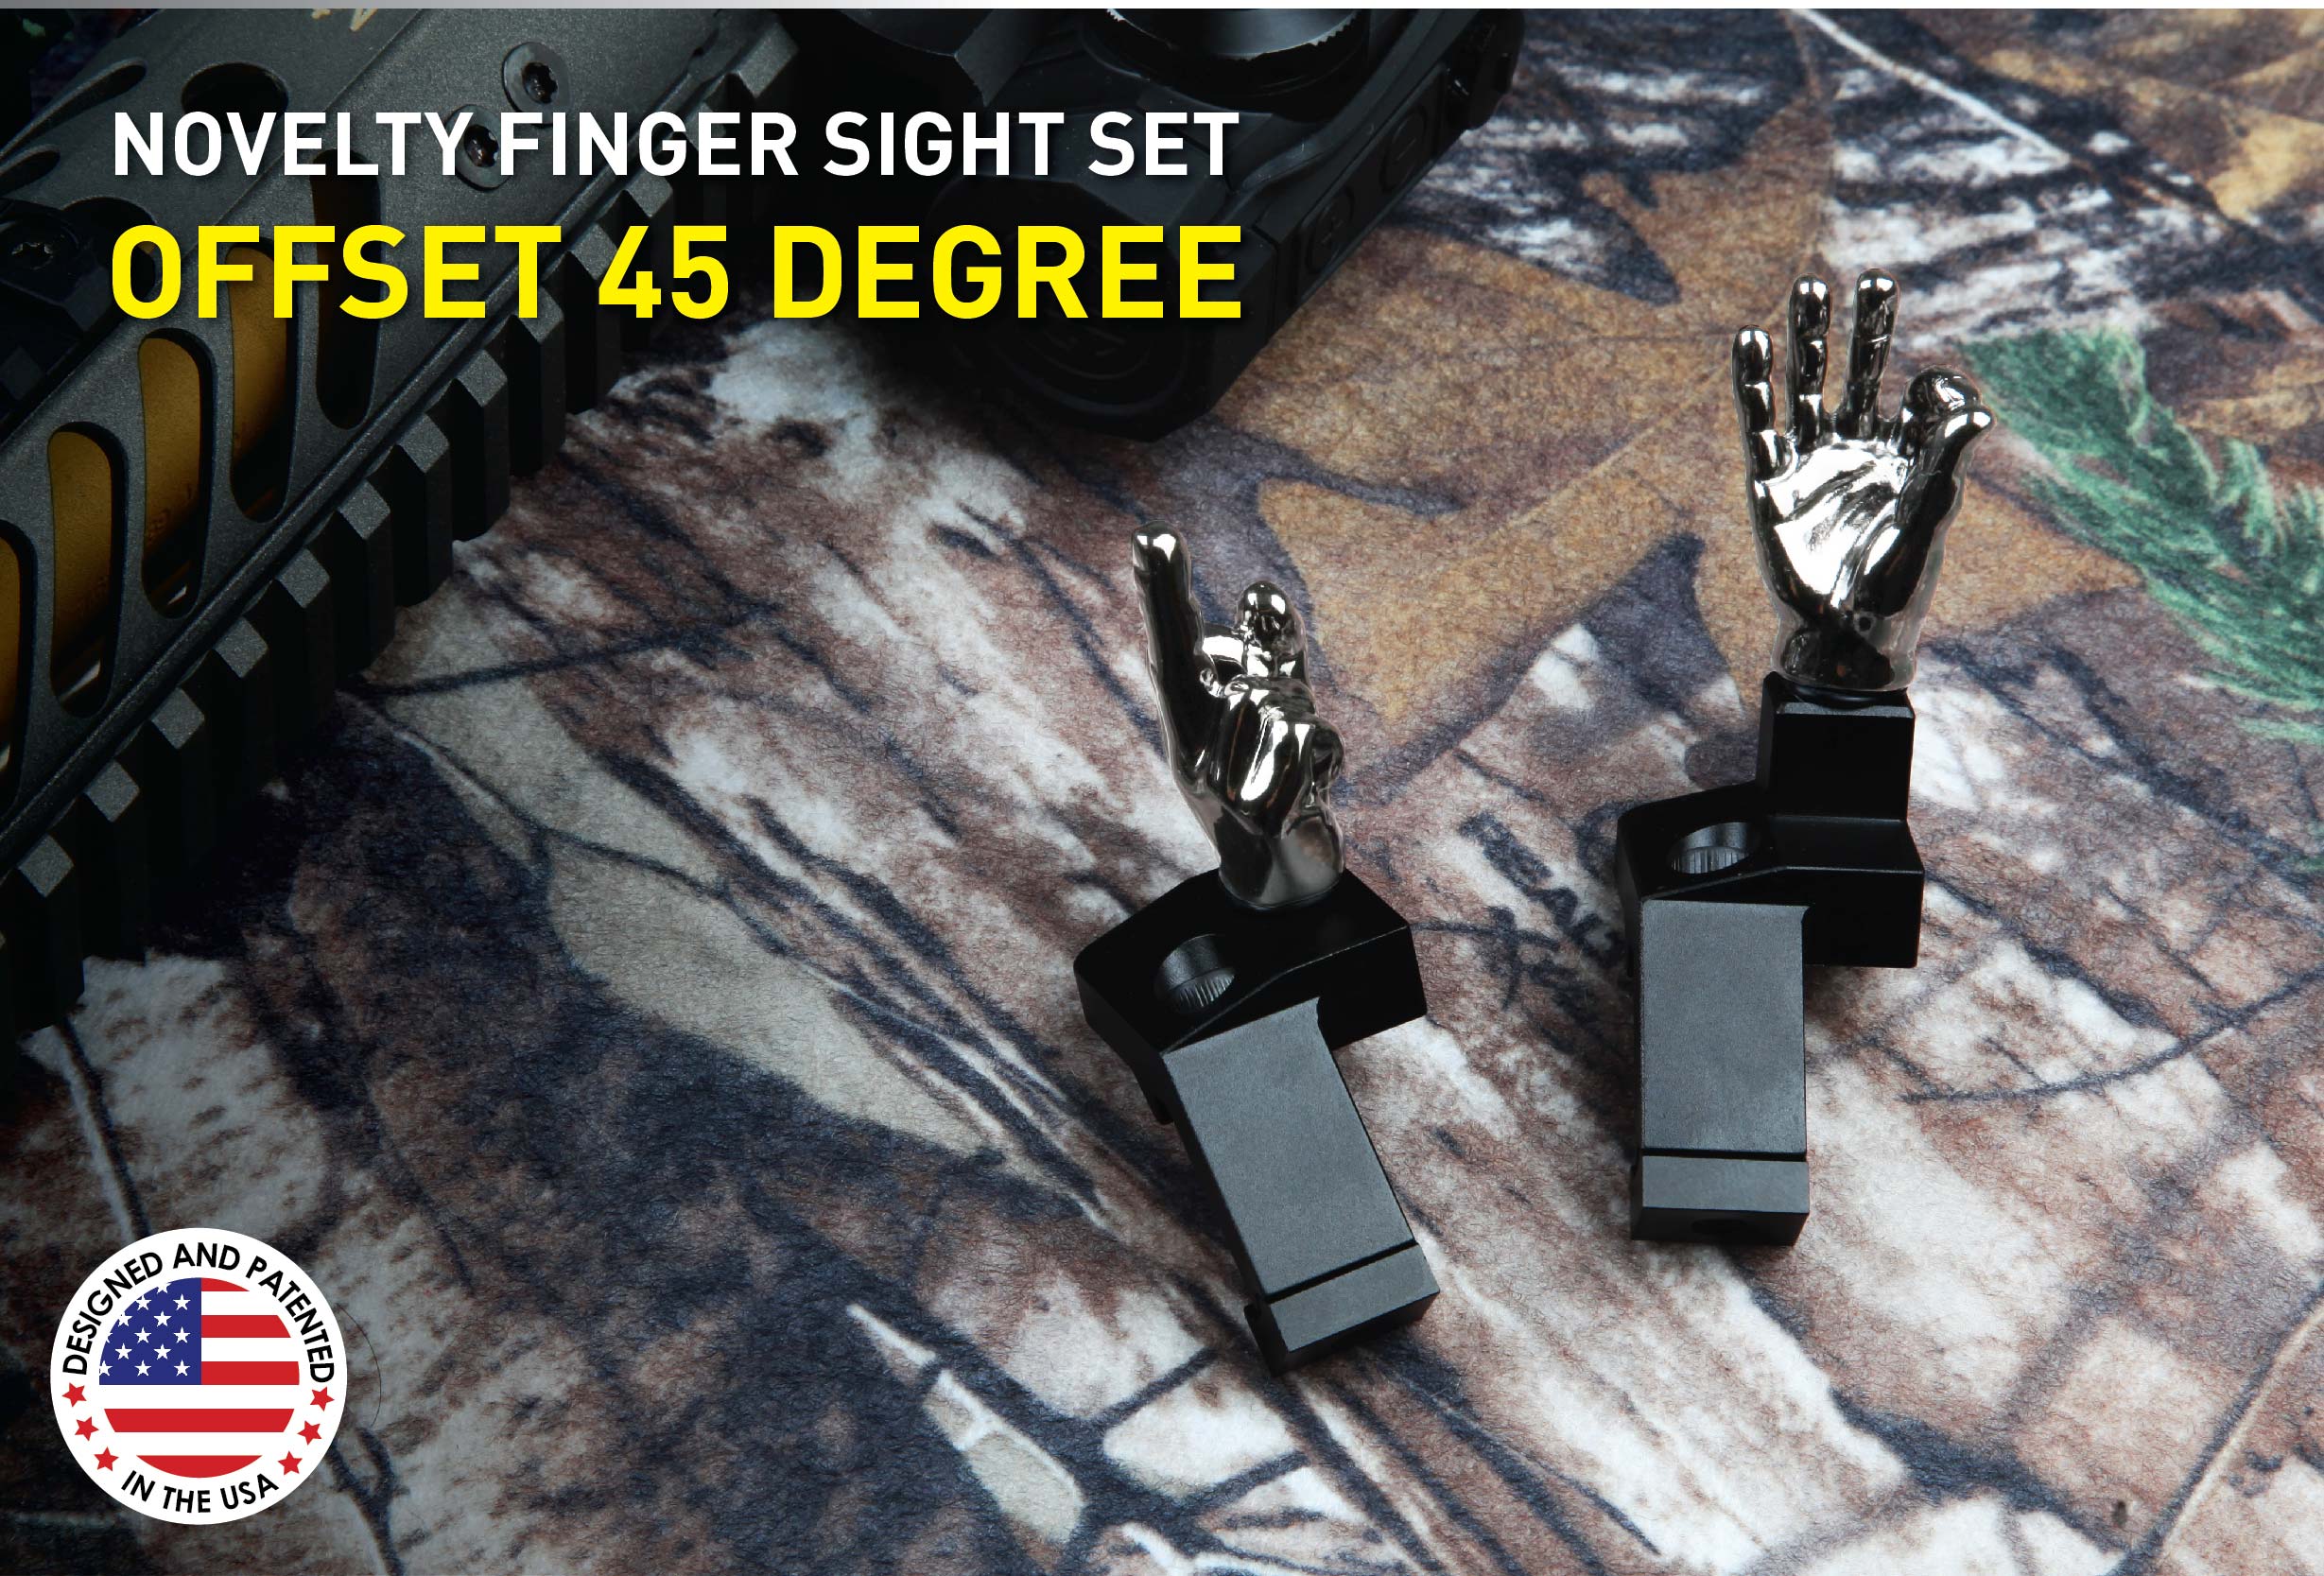 Stinger Novelty Finger Sights Set, Offset 45 Degree, OK Hand, Middle Finger, Flip Off, Backup Front and Rear Iron Sight BUIS Set, Fit Picatinny Rail and Weaver Rail, AR-15, Rifle